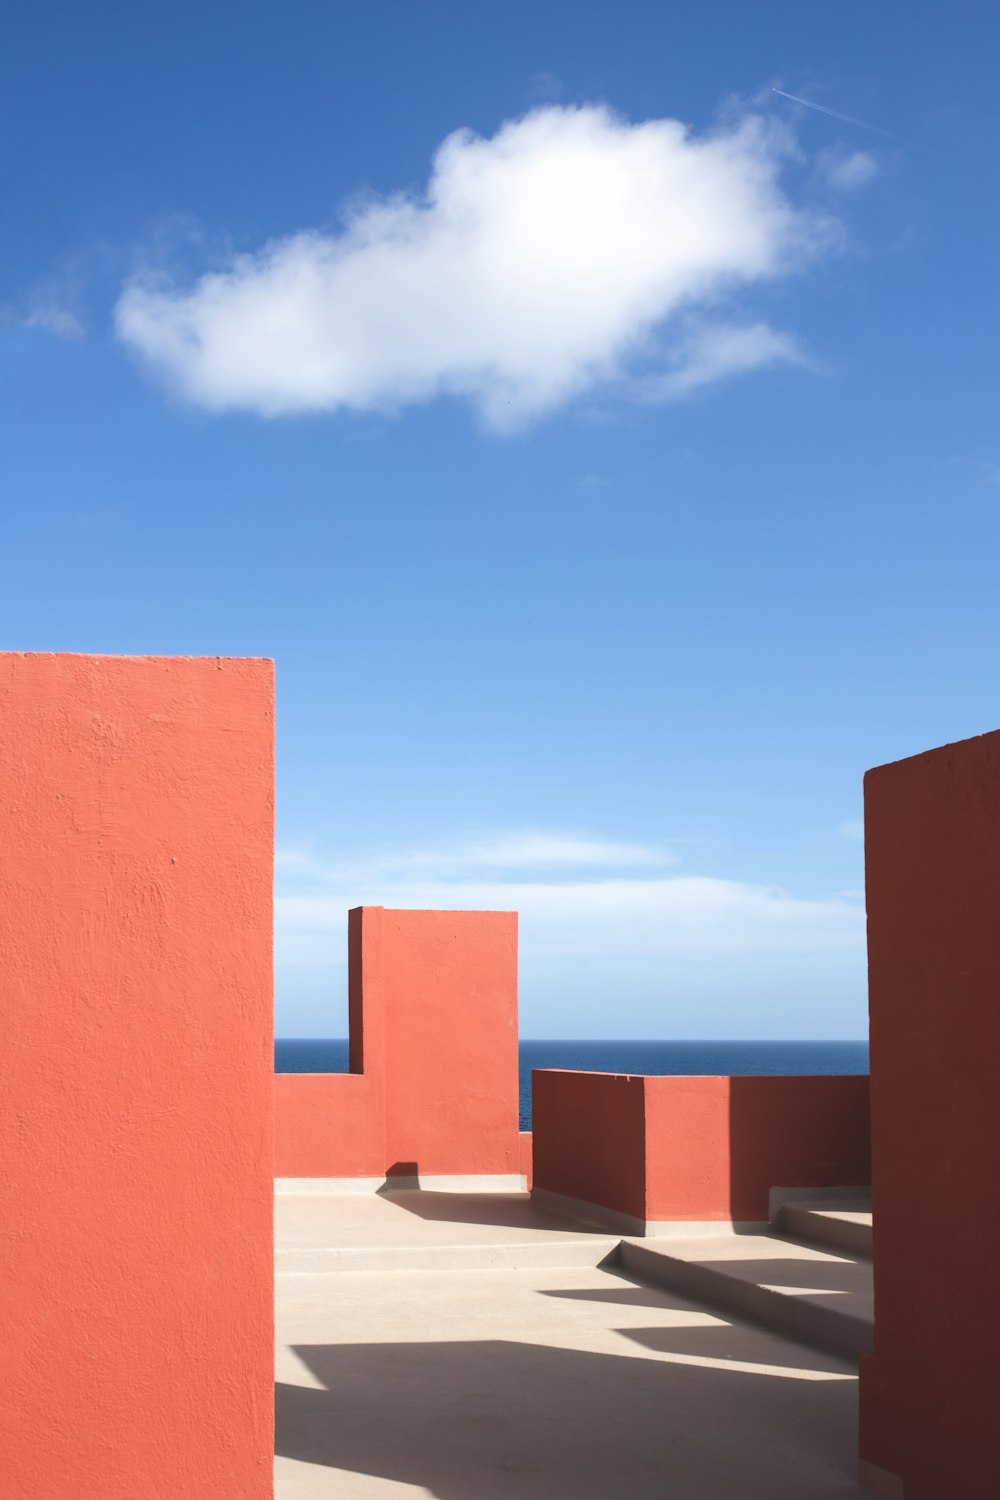 a group of red blocks sitting next to the ocean